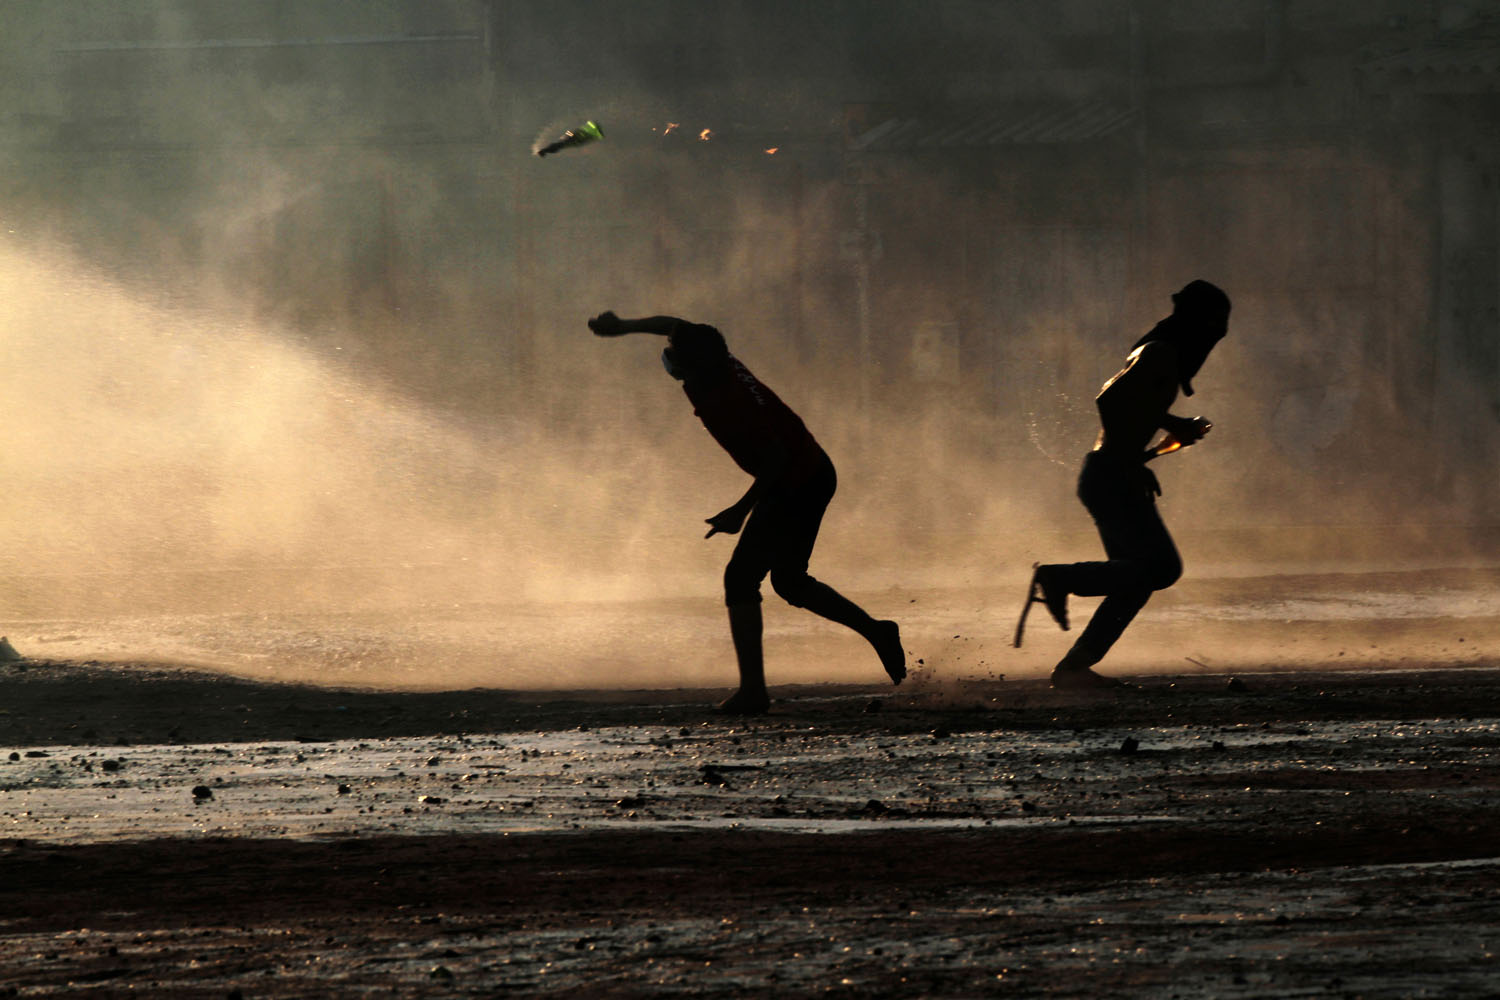 Oct. 5, 2012. Bahraini anti-government protesters, masked against tear gas, throw petrol bombs at a police water cannon truck during clashes with riot police in Sanabis, Bahrain.